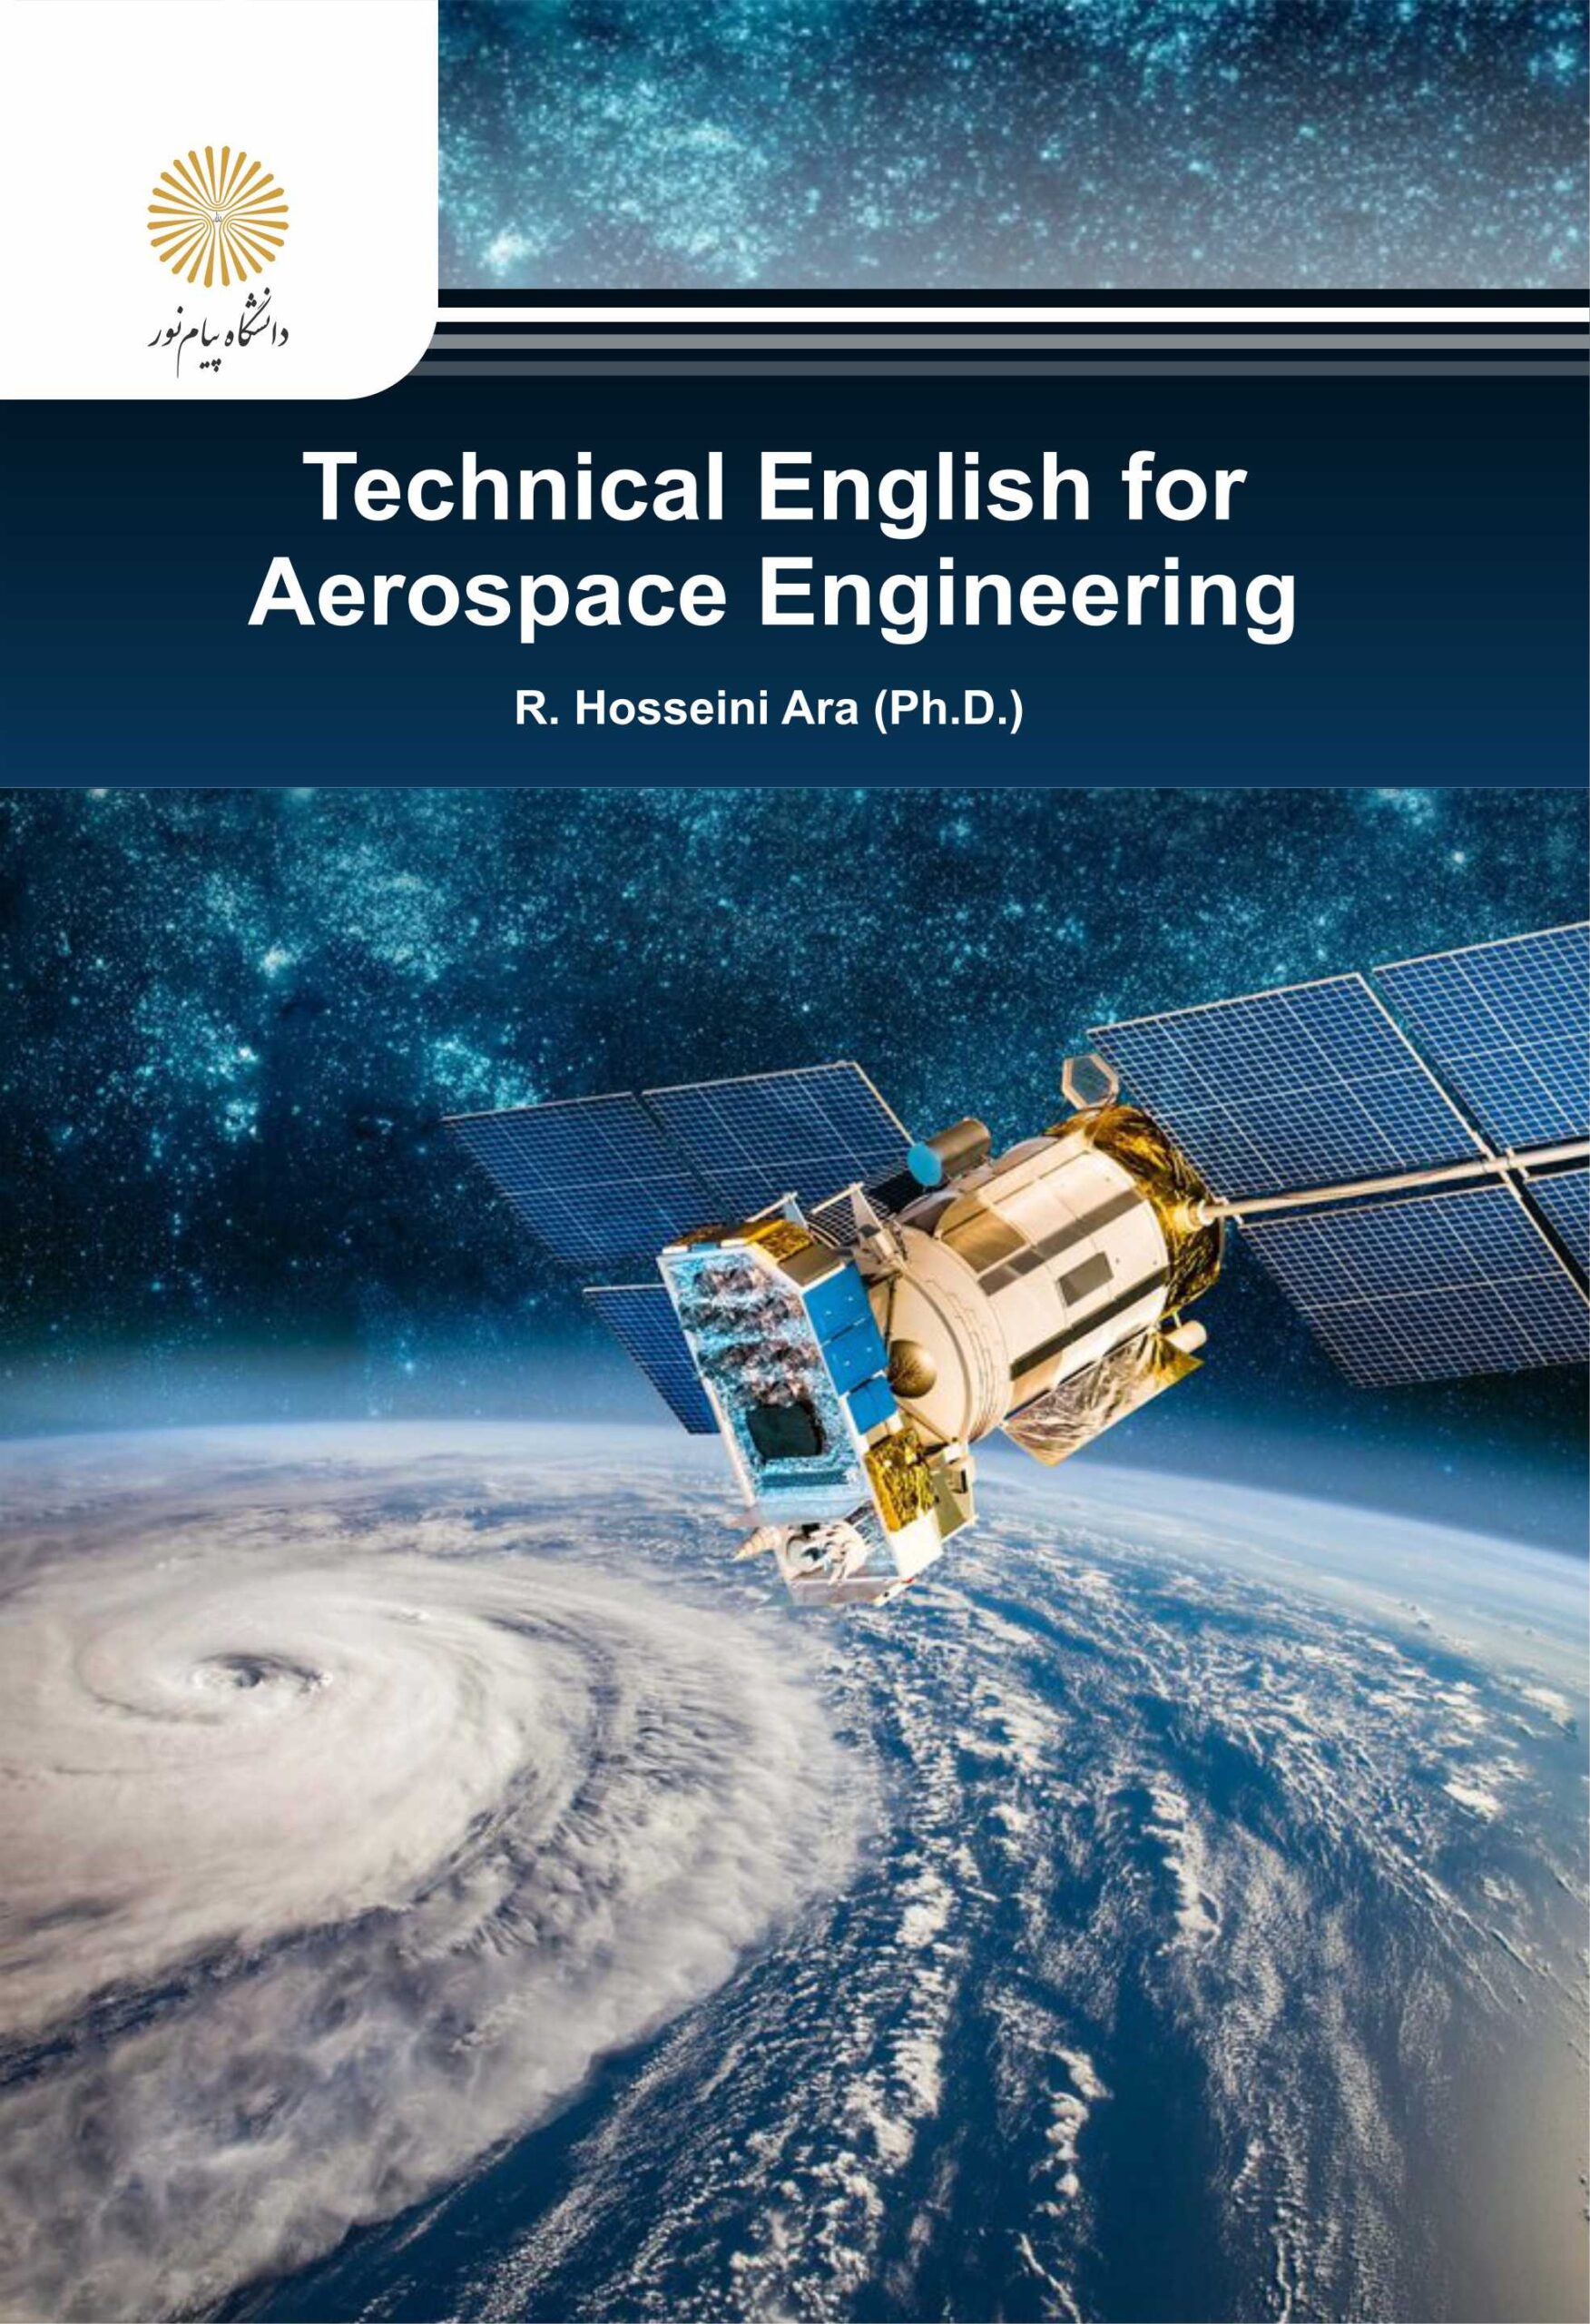 Technical English for Aerospace Engineering